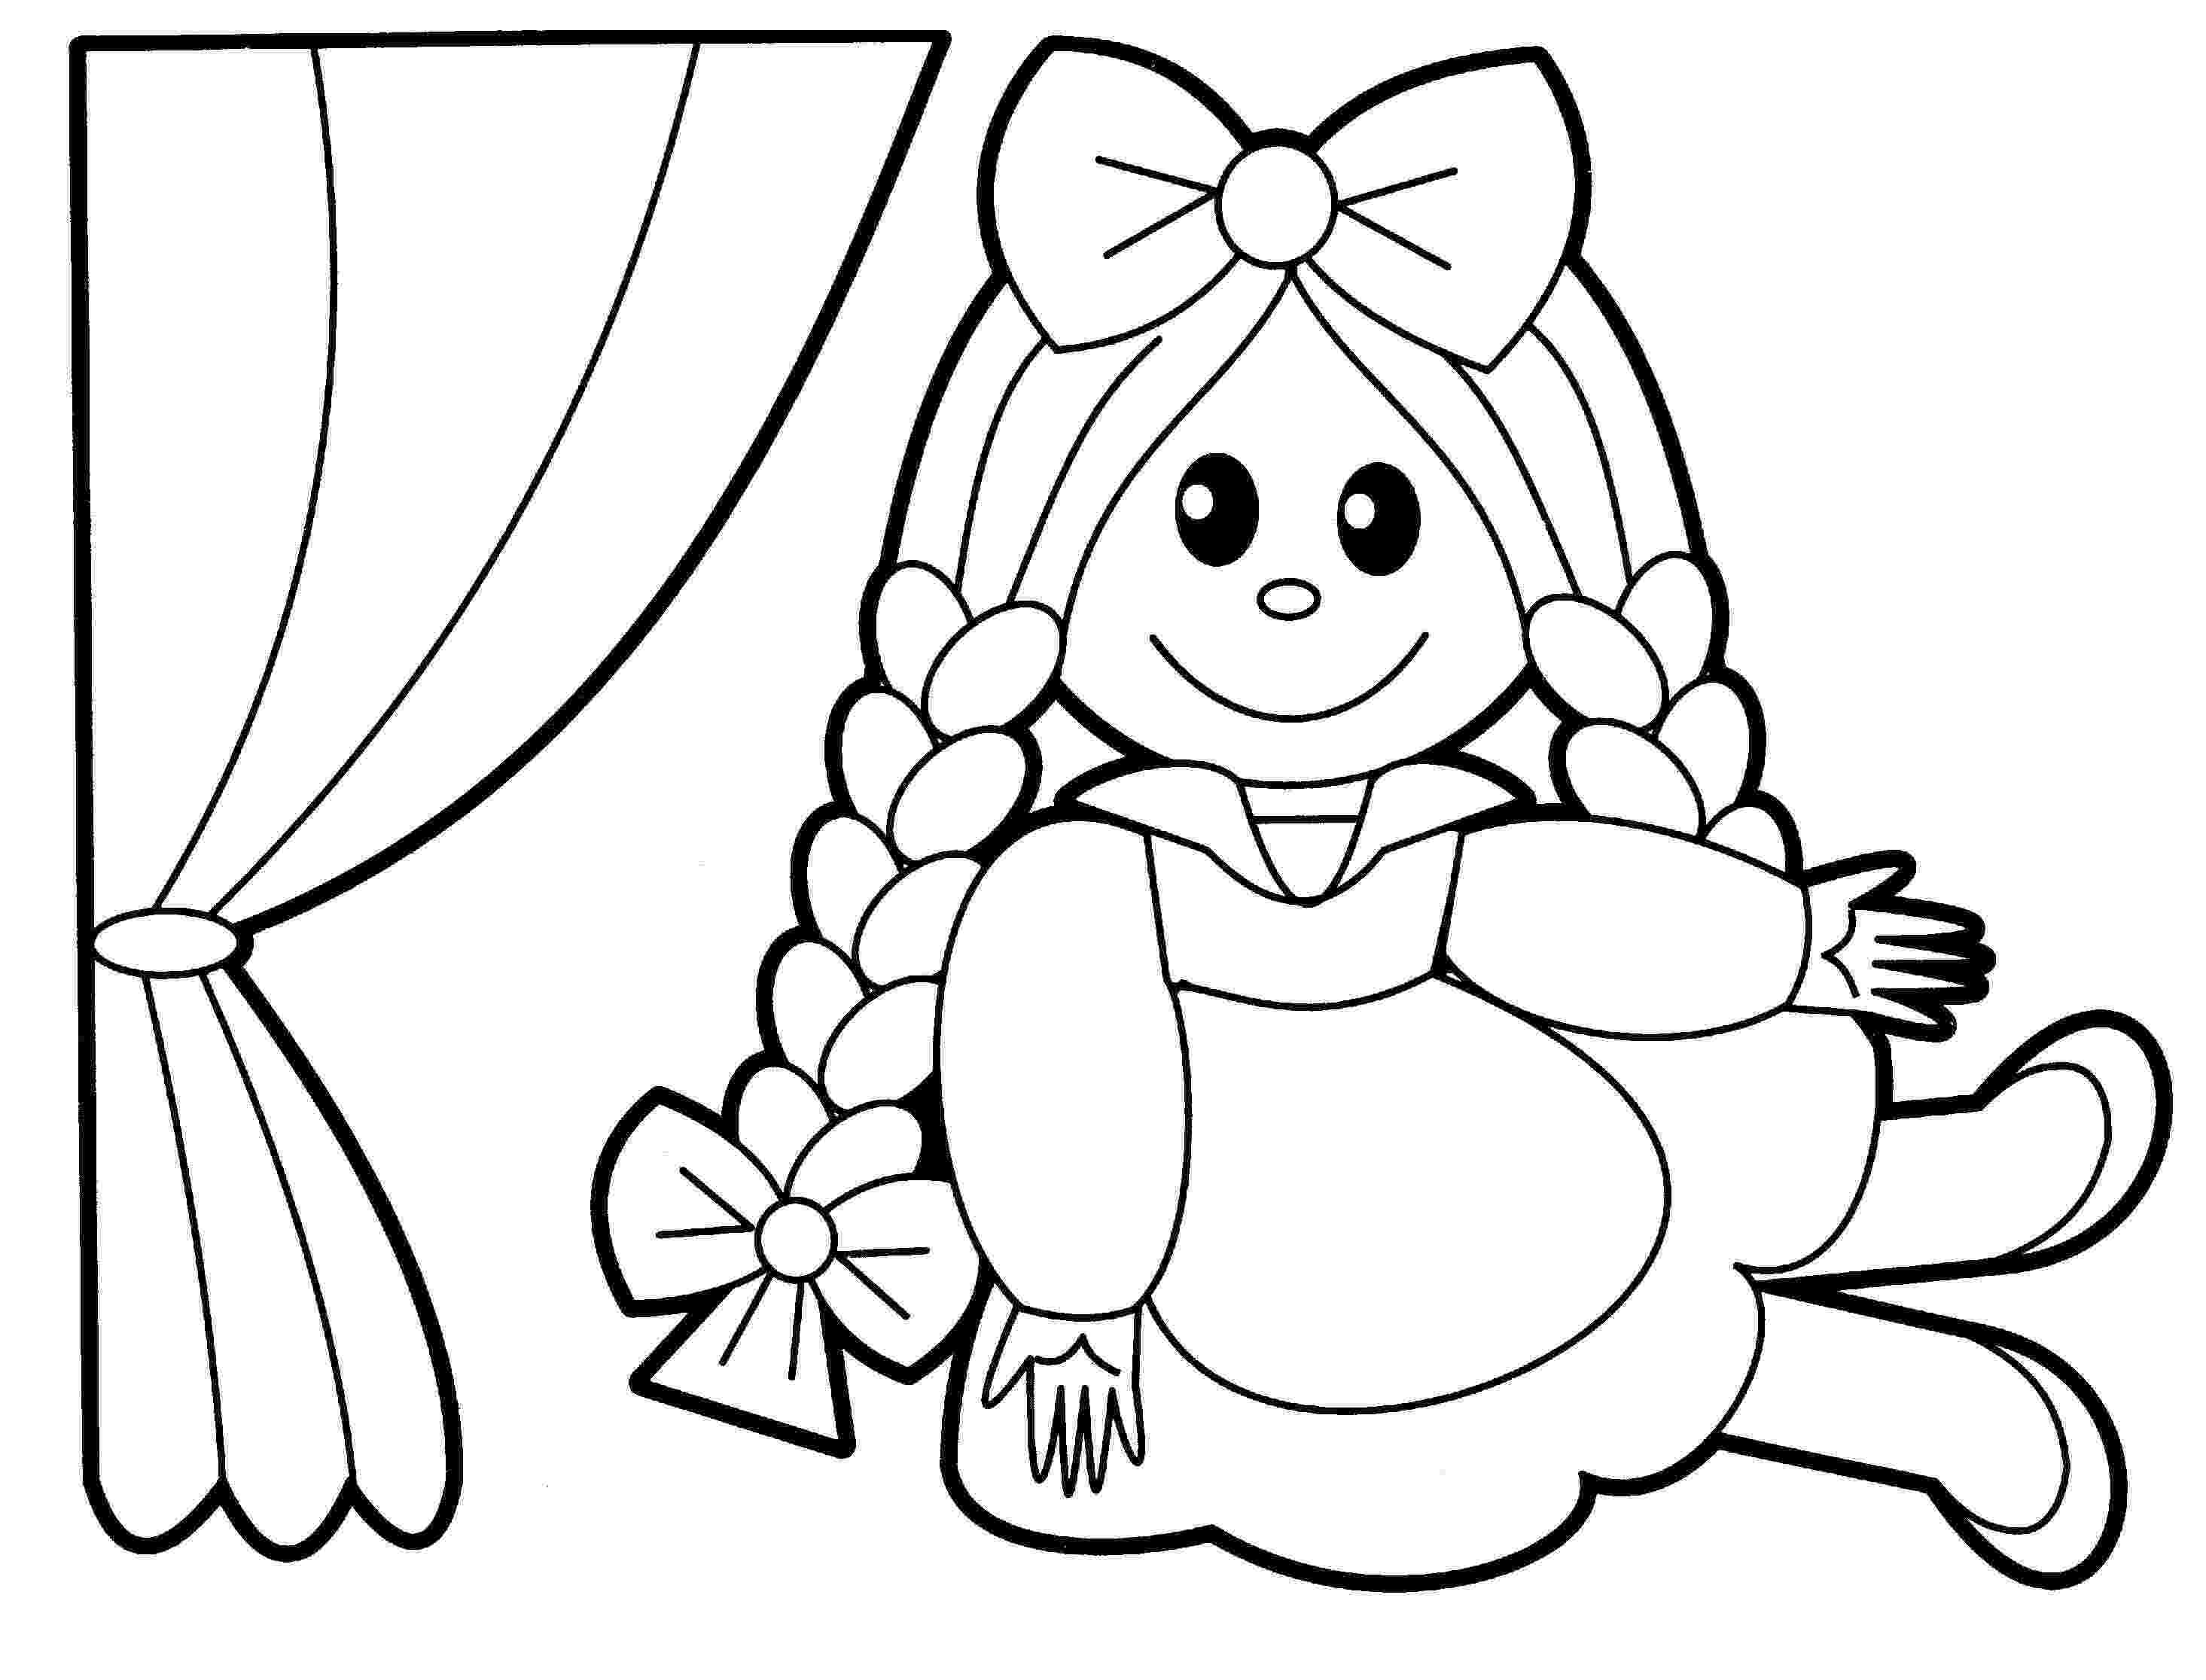 dolls coloring pages toys coloring pages best coloring pages for kids dolls coloring pages 